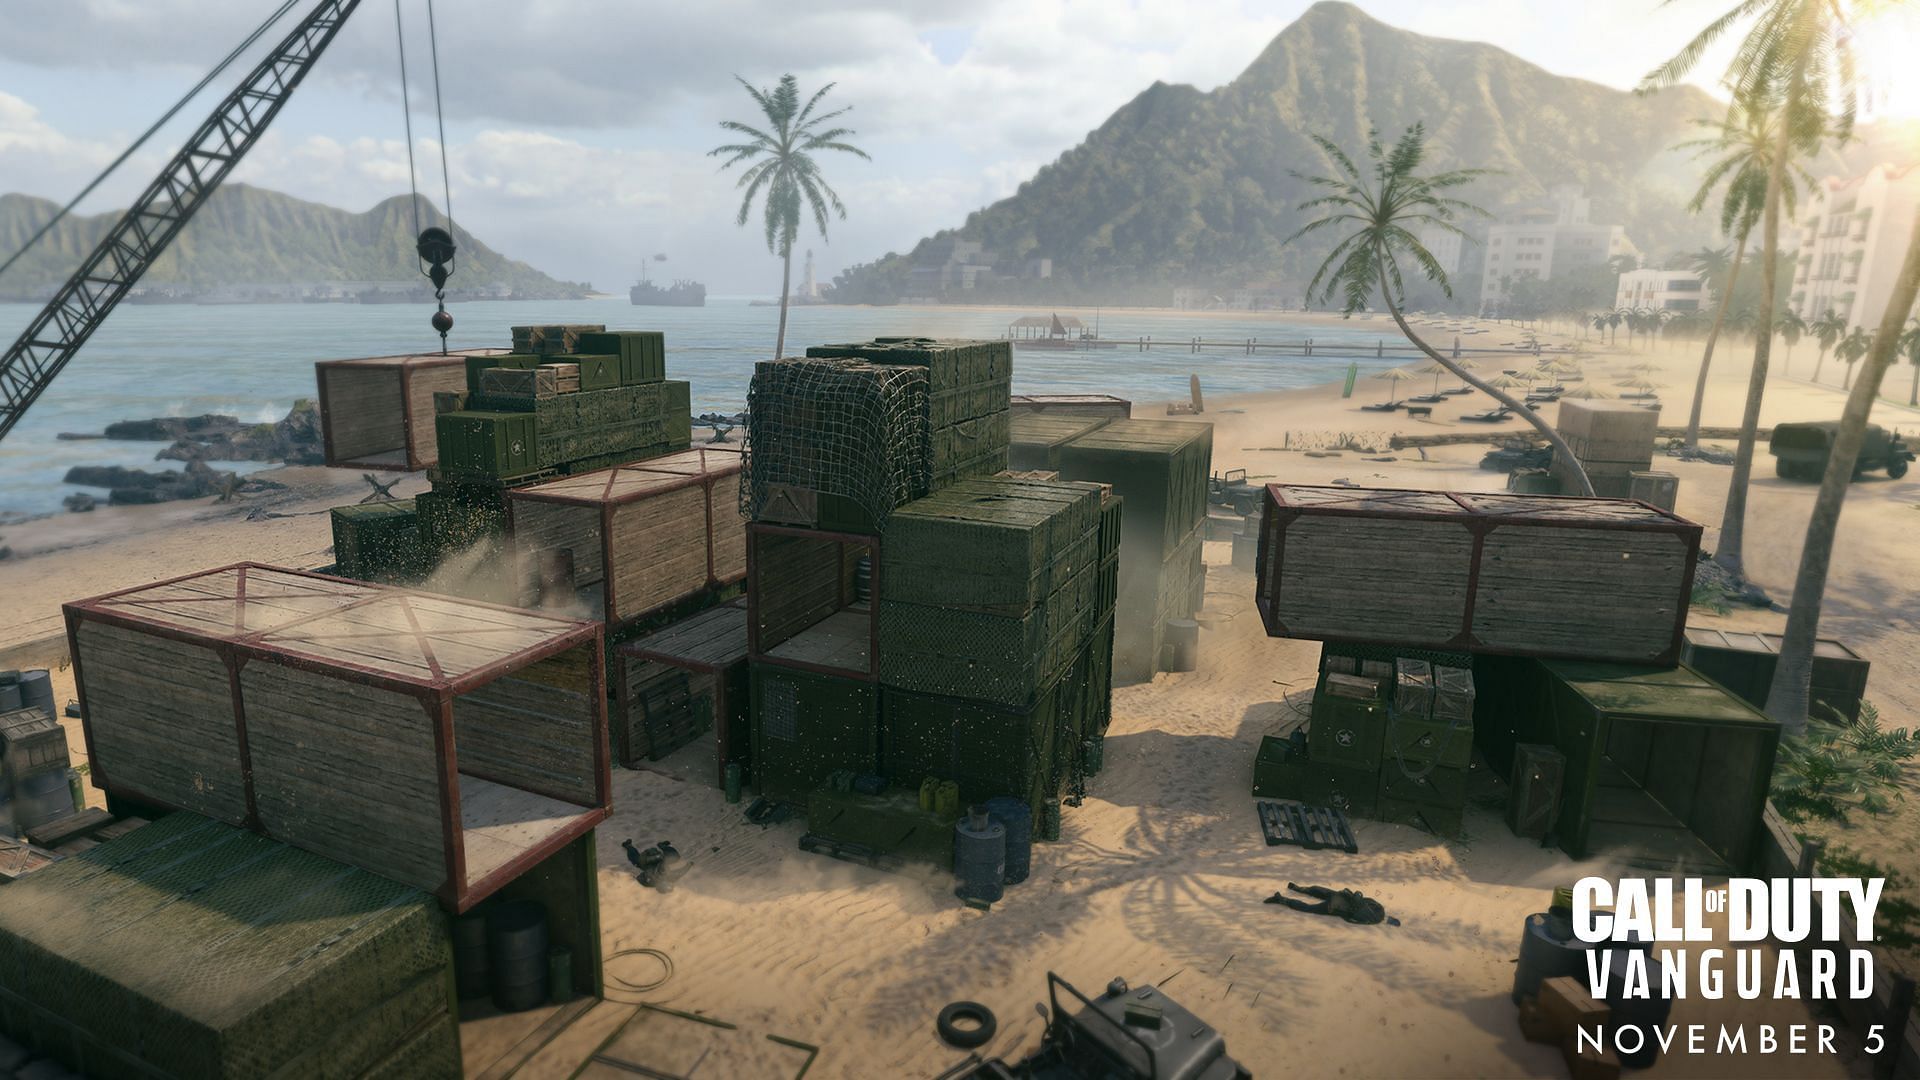 Call of Duty Vanguard players will soon be able to enjoy a fan-favorite map (Image by Activision)